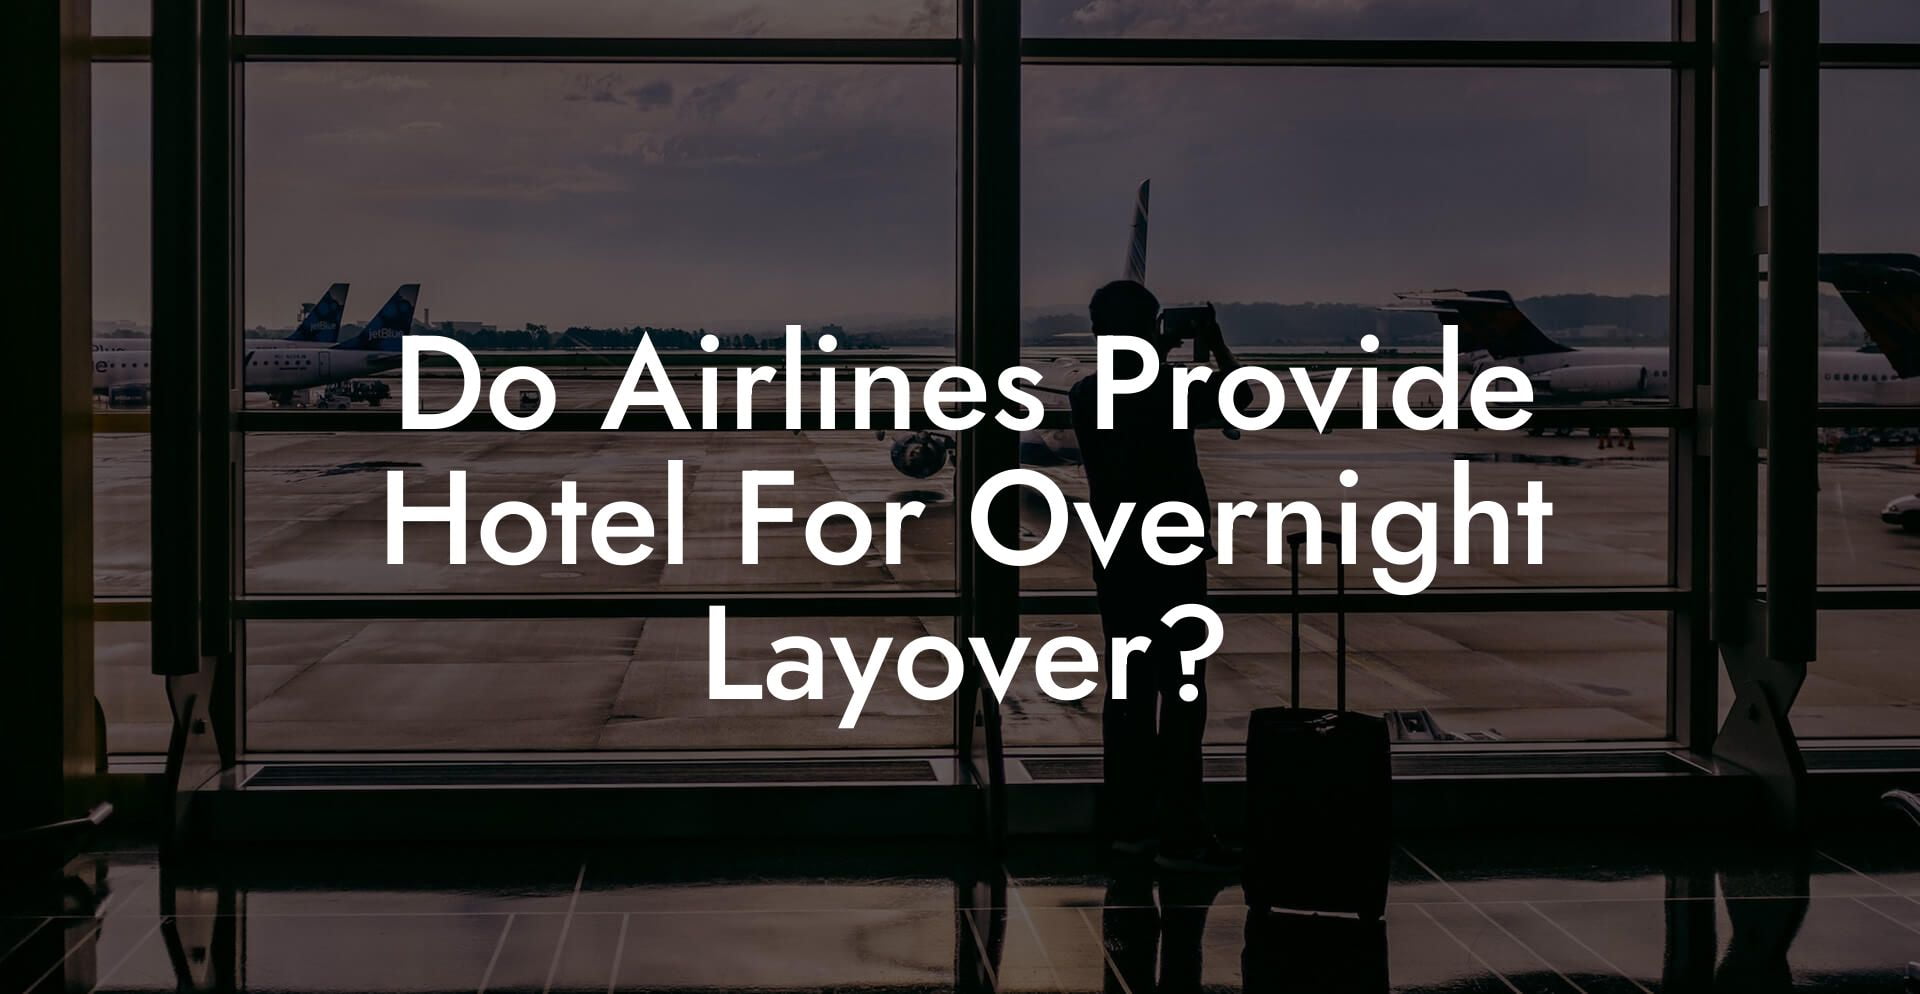 Do Airlines Provide Hotel For Overnight Layover?